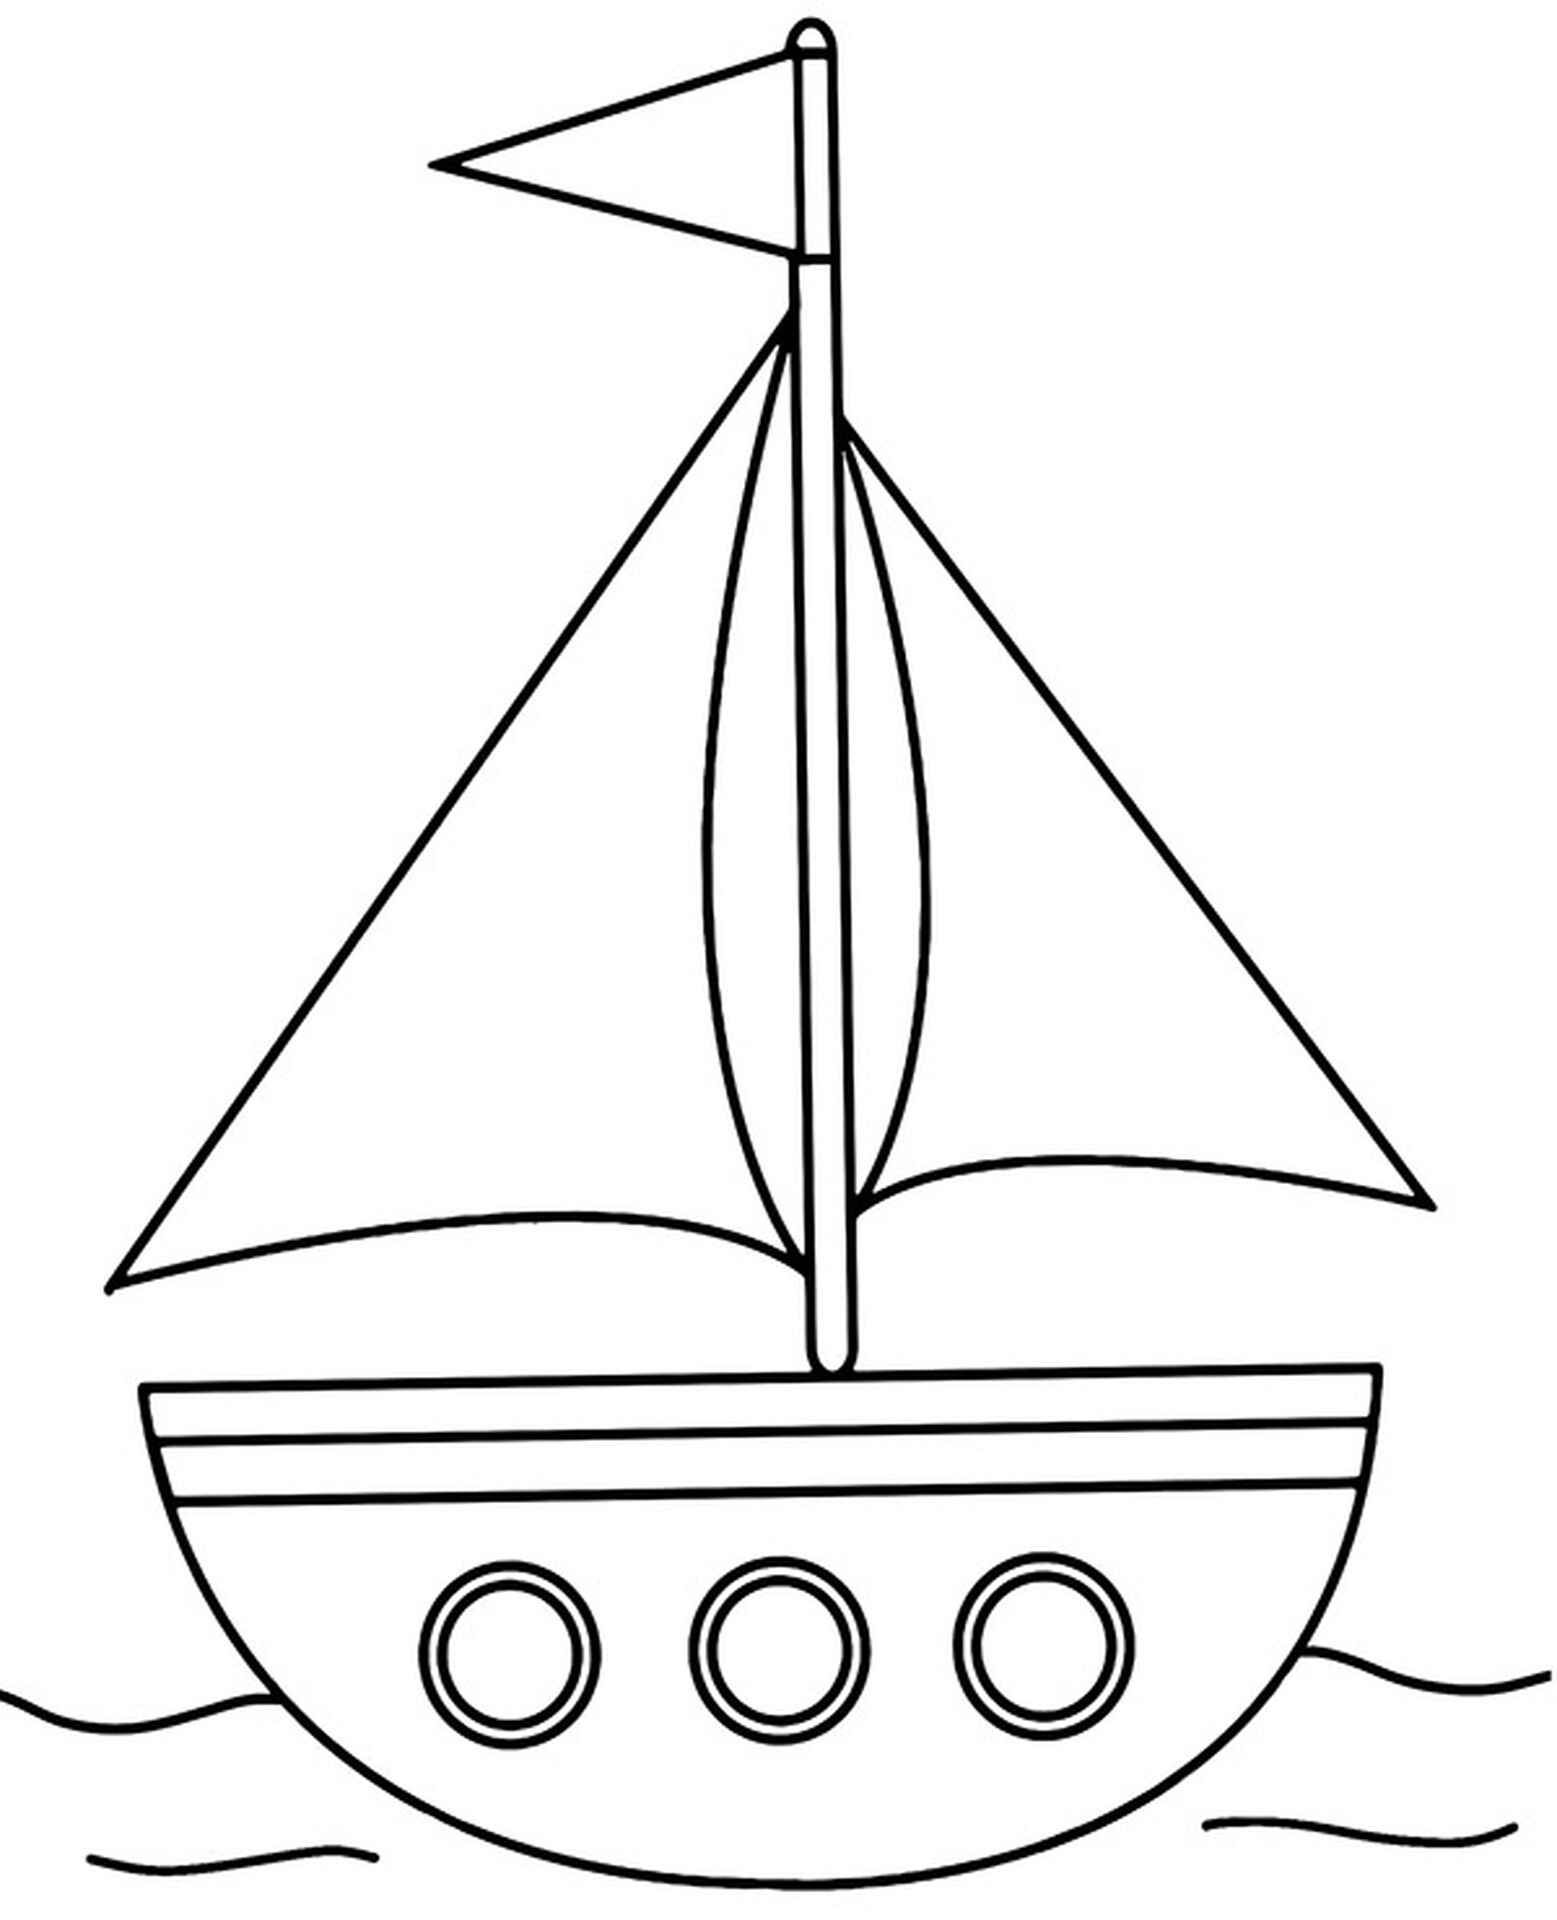 Weird boat coloring for 6-7 year olds